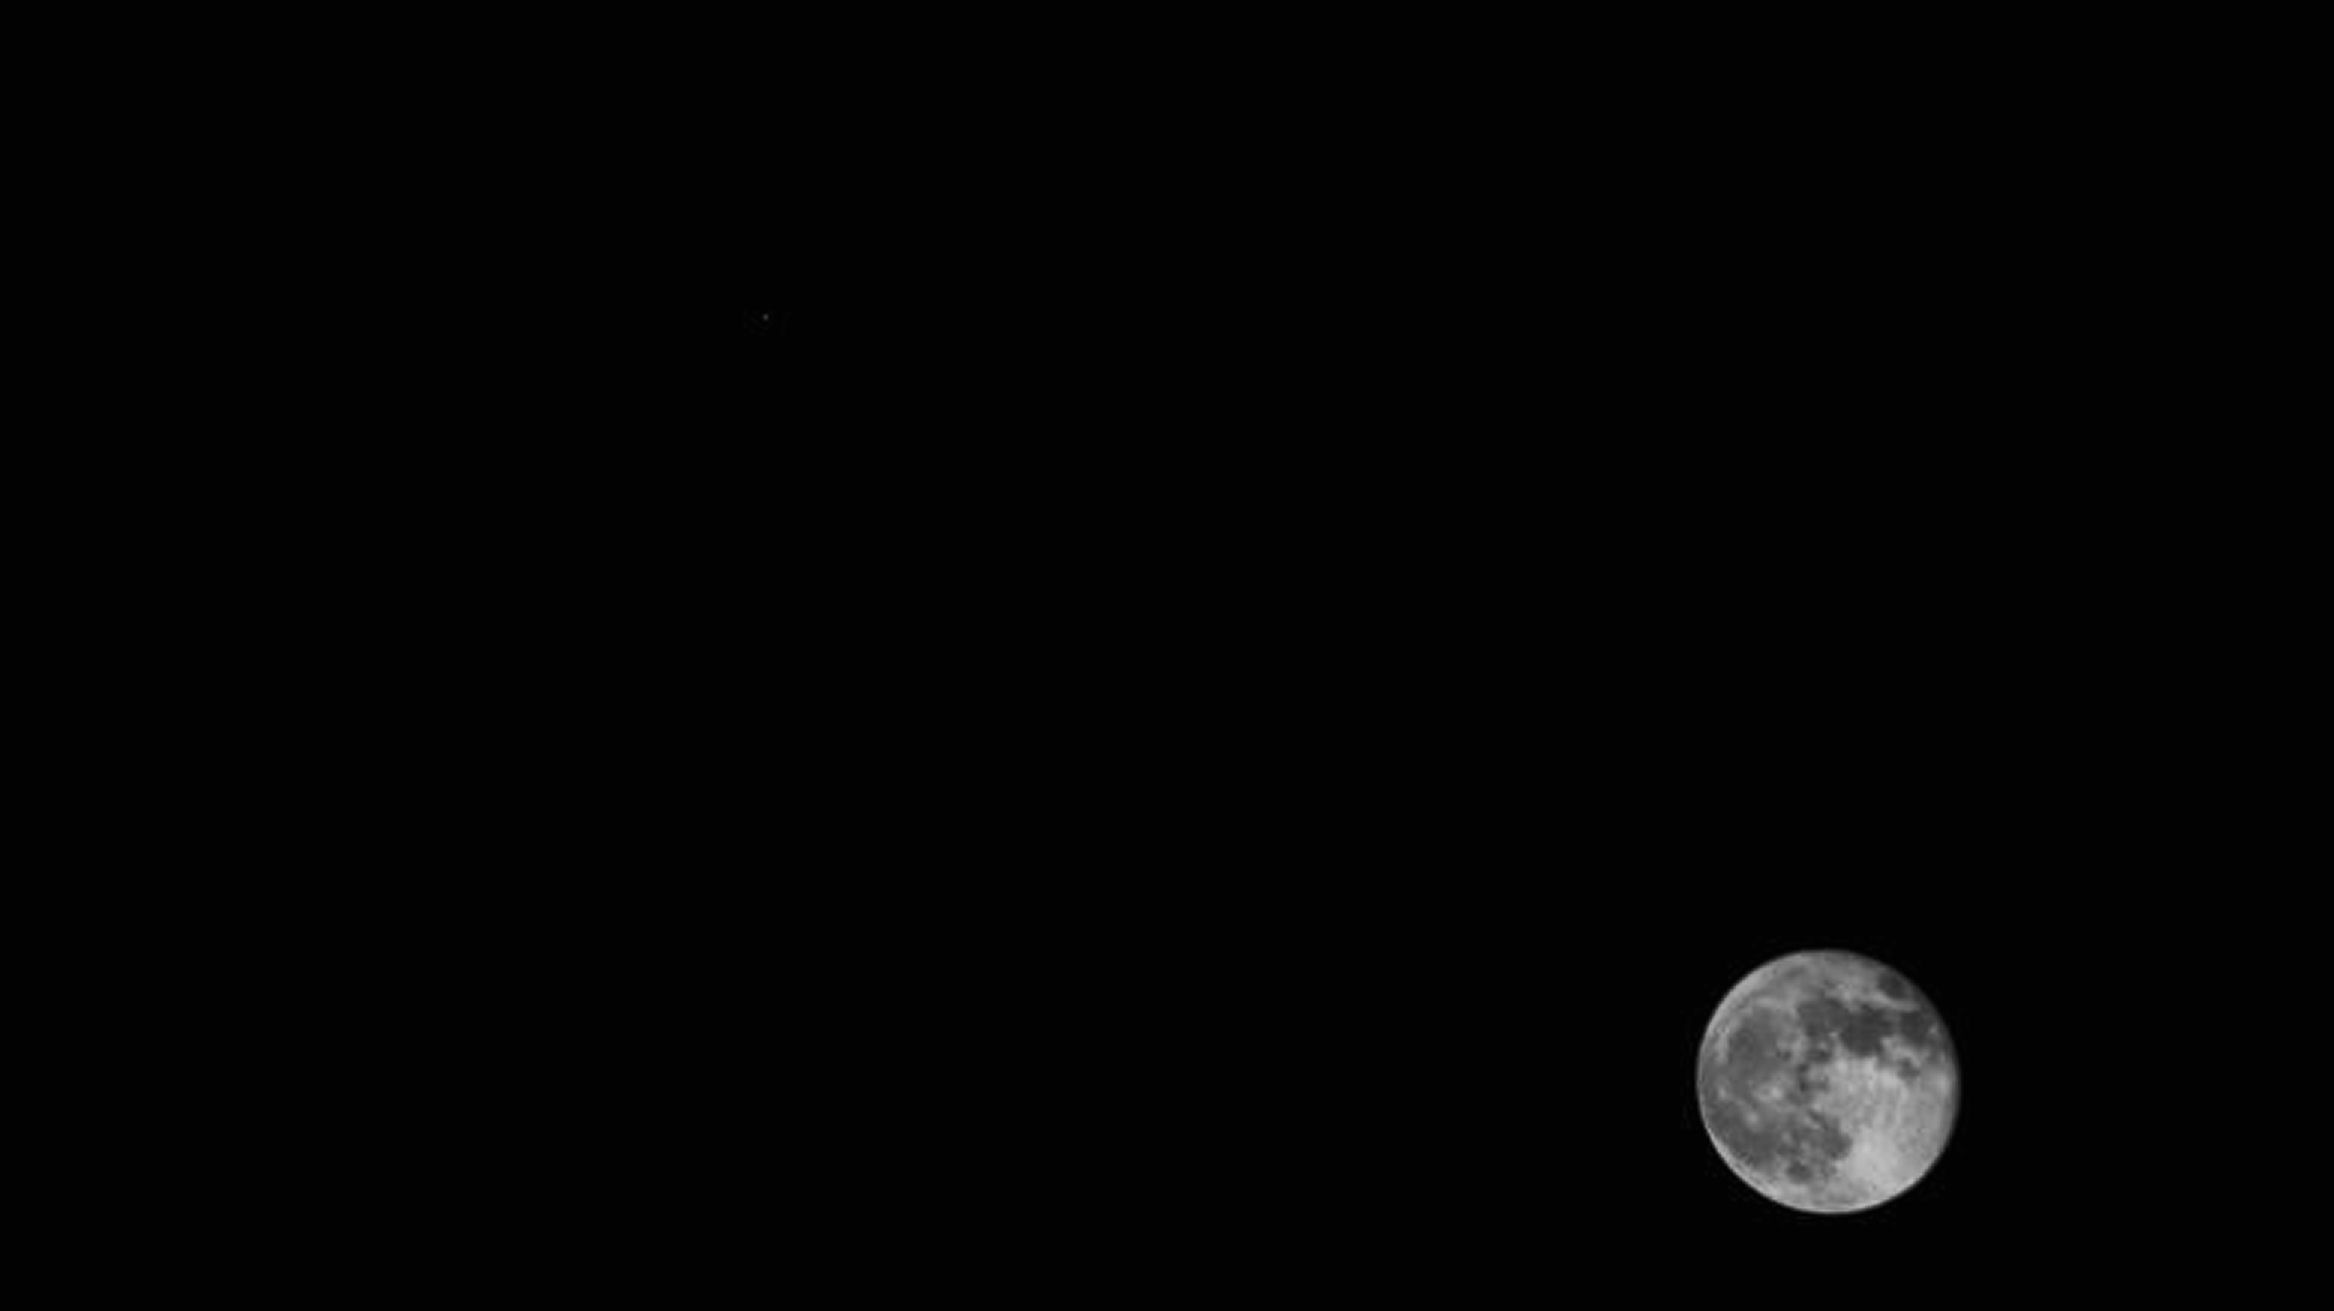 Moon & Jupiter  24 Feb 2015. 00.25UT. Canon EOS-1200D ISO-1600  f/15 1/2000 seconds. After I had adjusted brightness & contrast in Photoshop I discovered a nifty little proggy called  "Black Frame" and took a black exposure for 1/2000 second and applied this to the original picture just to see how effective it was at eliminating hotspots.  I can say this was a simple and fast 3 click operation and eliminated all hotspots.